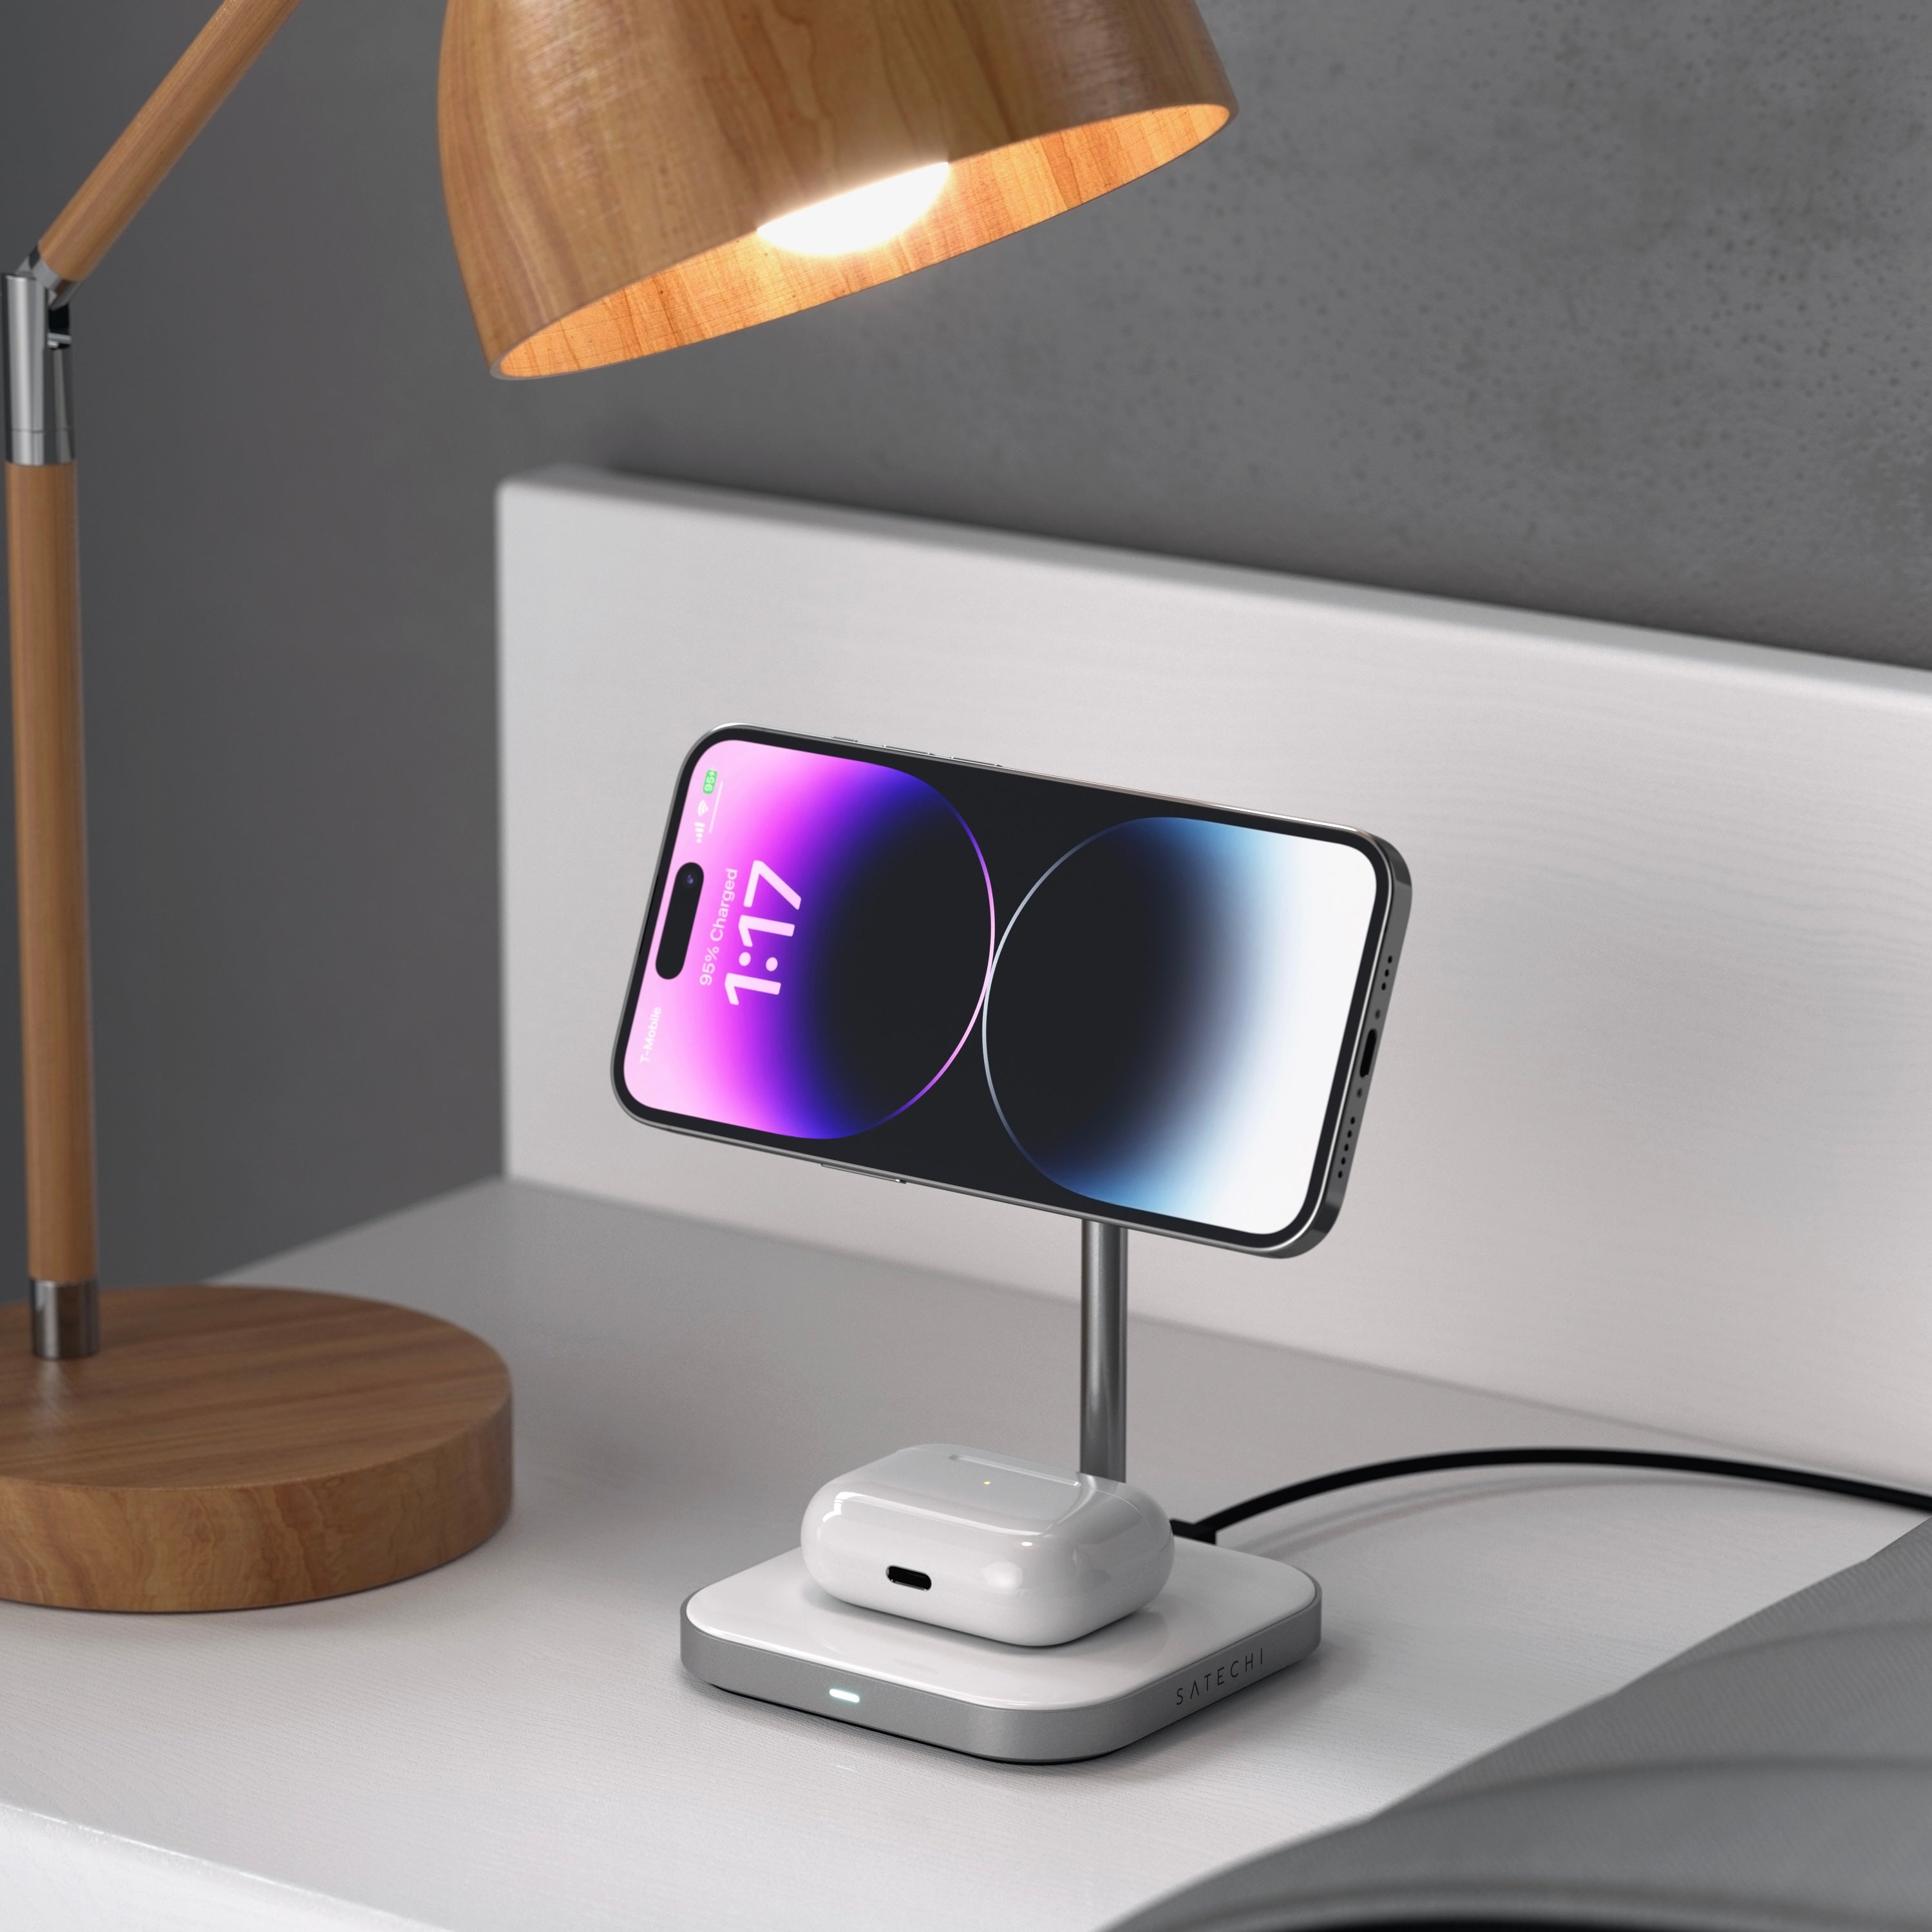 The Satechi Magnetic 2-in-1 Wireless Charging Stand combines the power of dual wireless charging with the convenience of hands-free magnetic attachment. Designed for iPhone 12/13 and AirPods Pro, the Stand features a built-in magnetic charger and a designated wireless charging pad to power both devices with ease.